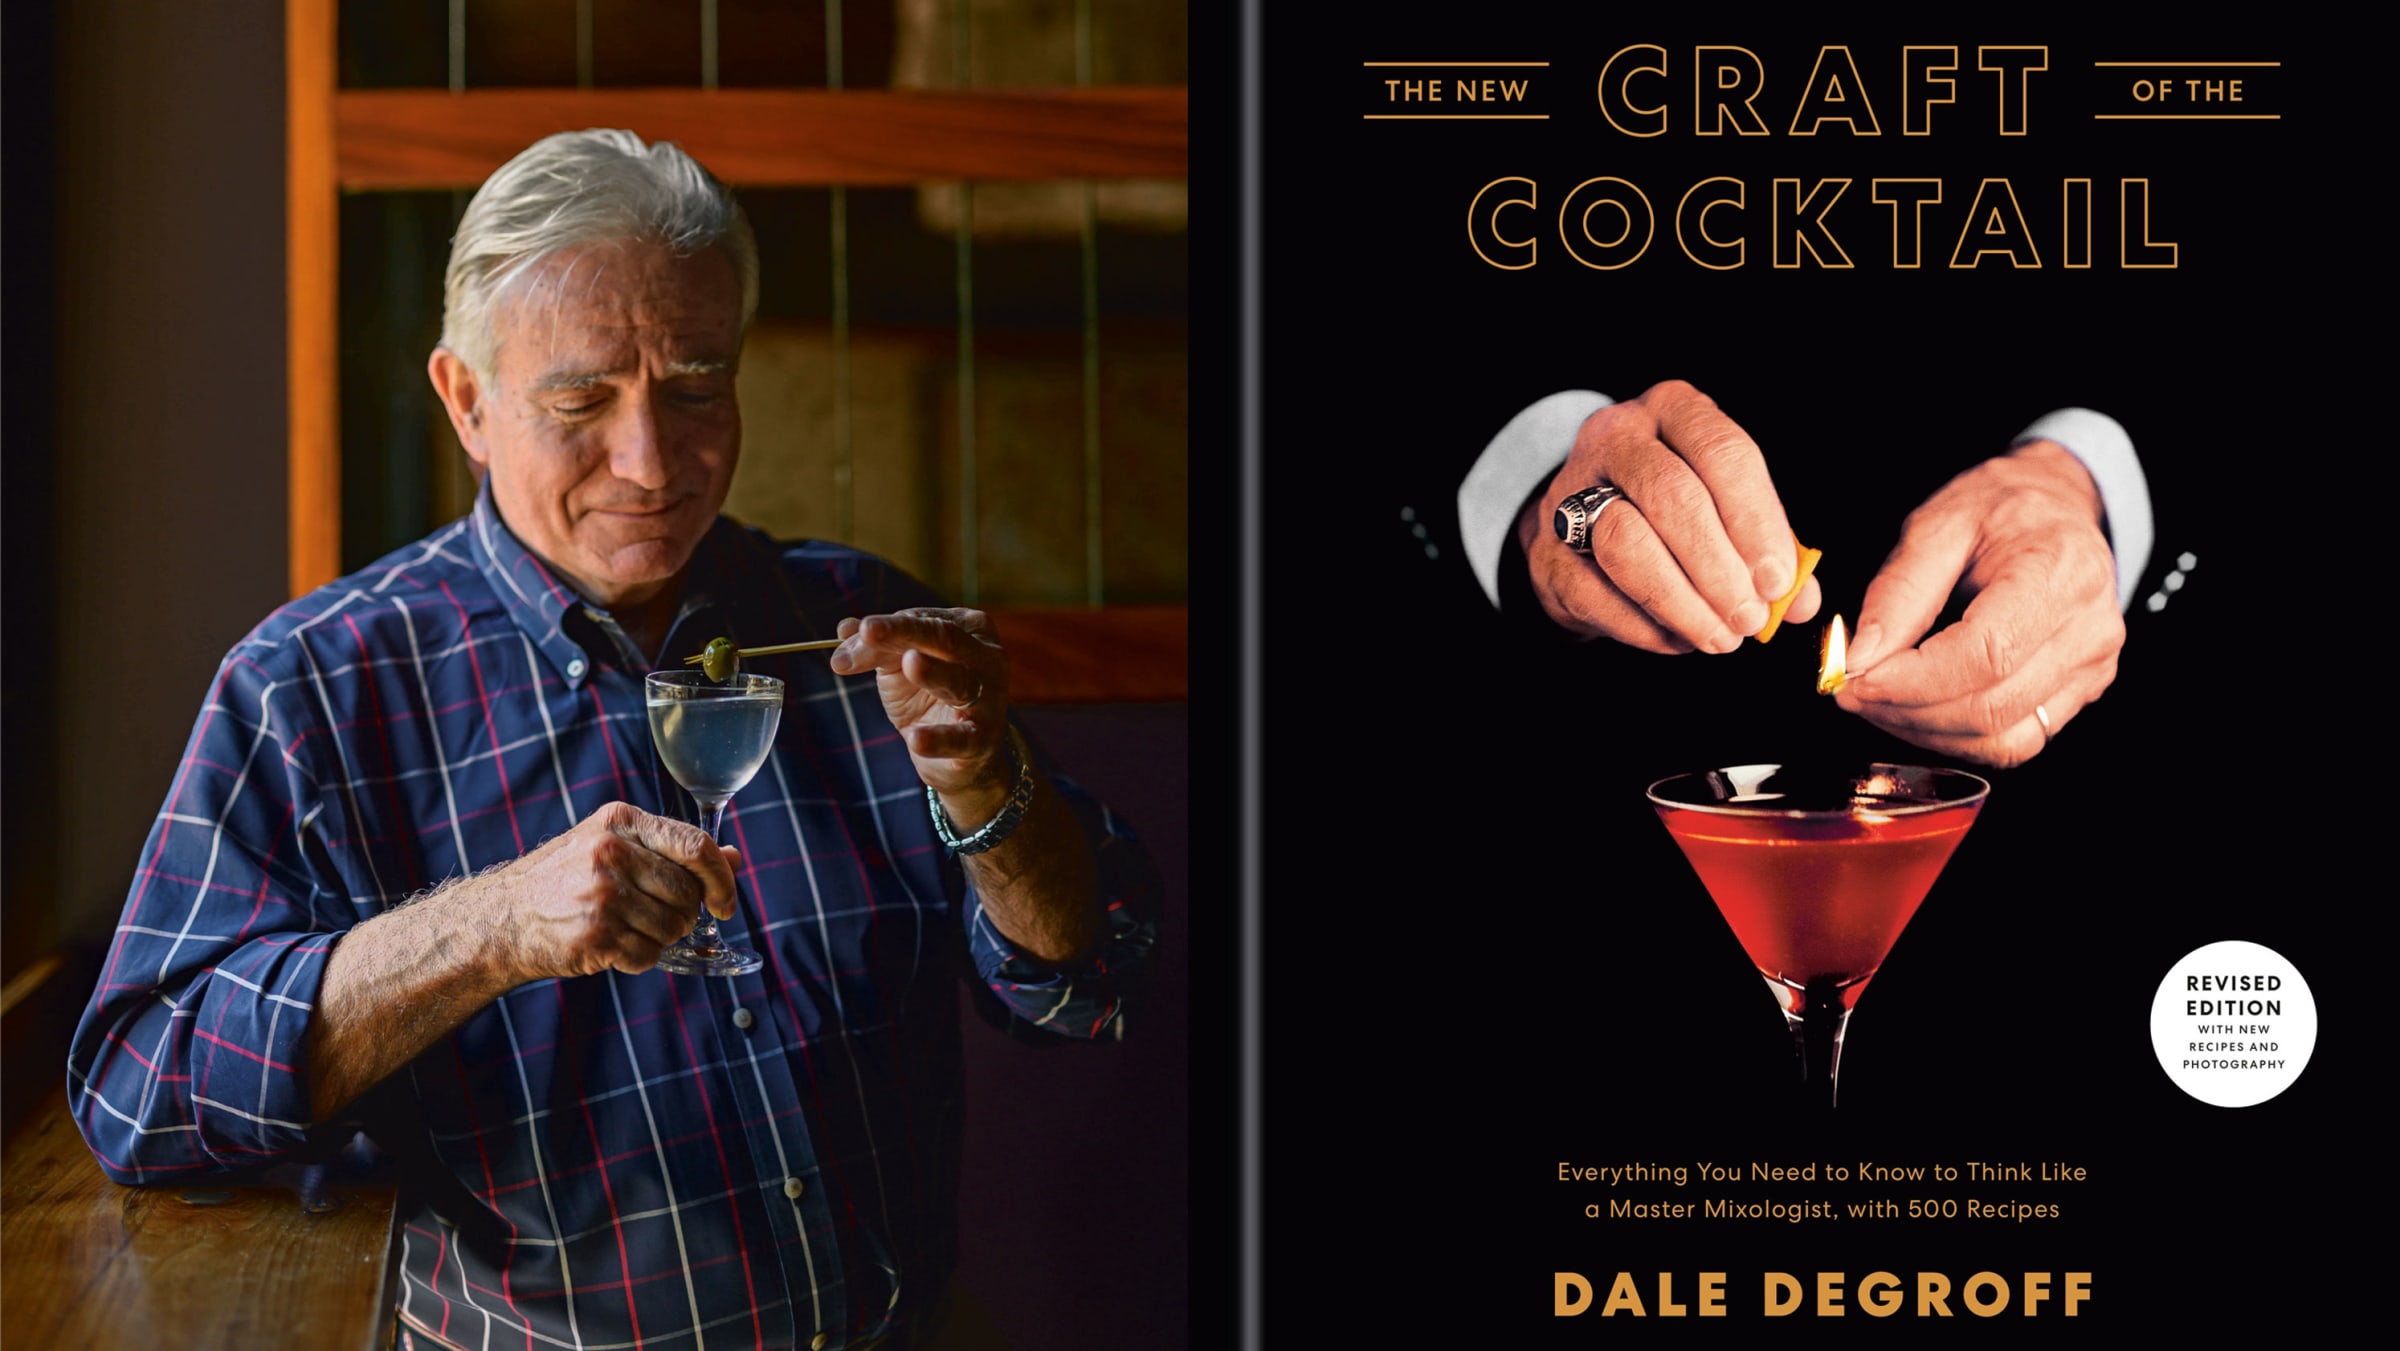 Book Review: “The New Craft of the Cocktail” by Dale DeGroff